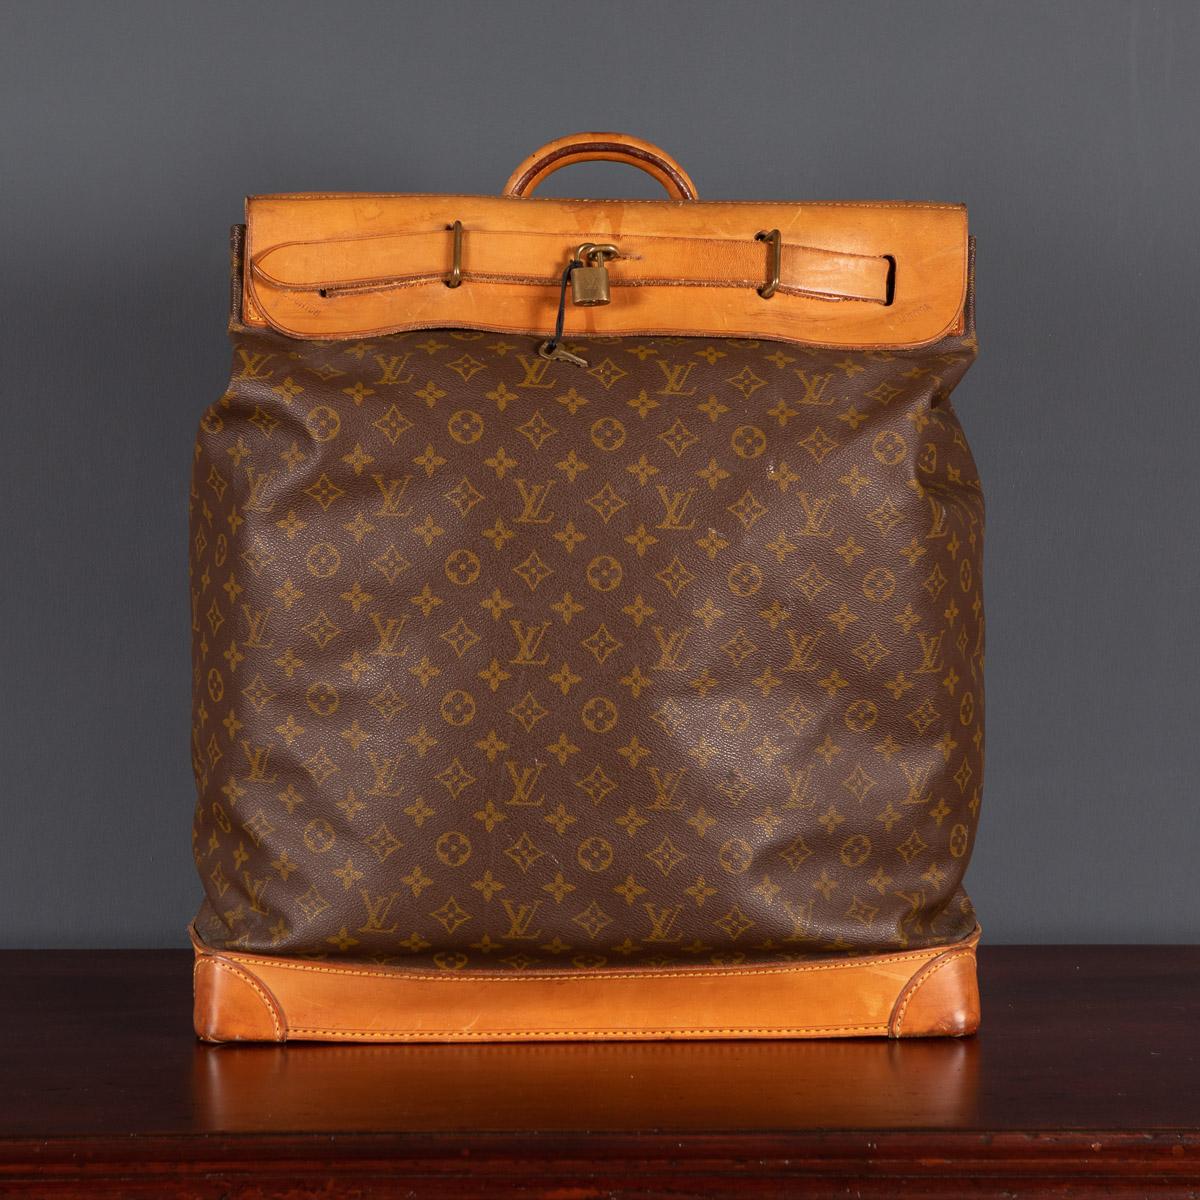 A lovely Louis Vuitton steamer travel bag in monogram canvas and natural tan leather, made in France in the latter quarter of the 20th century. Steamer bags have been produced by Louis Vuitton for over 120 years. In 1901, the company introduced the